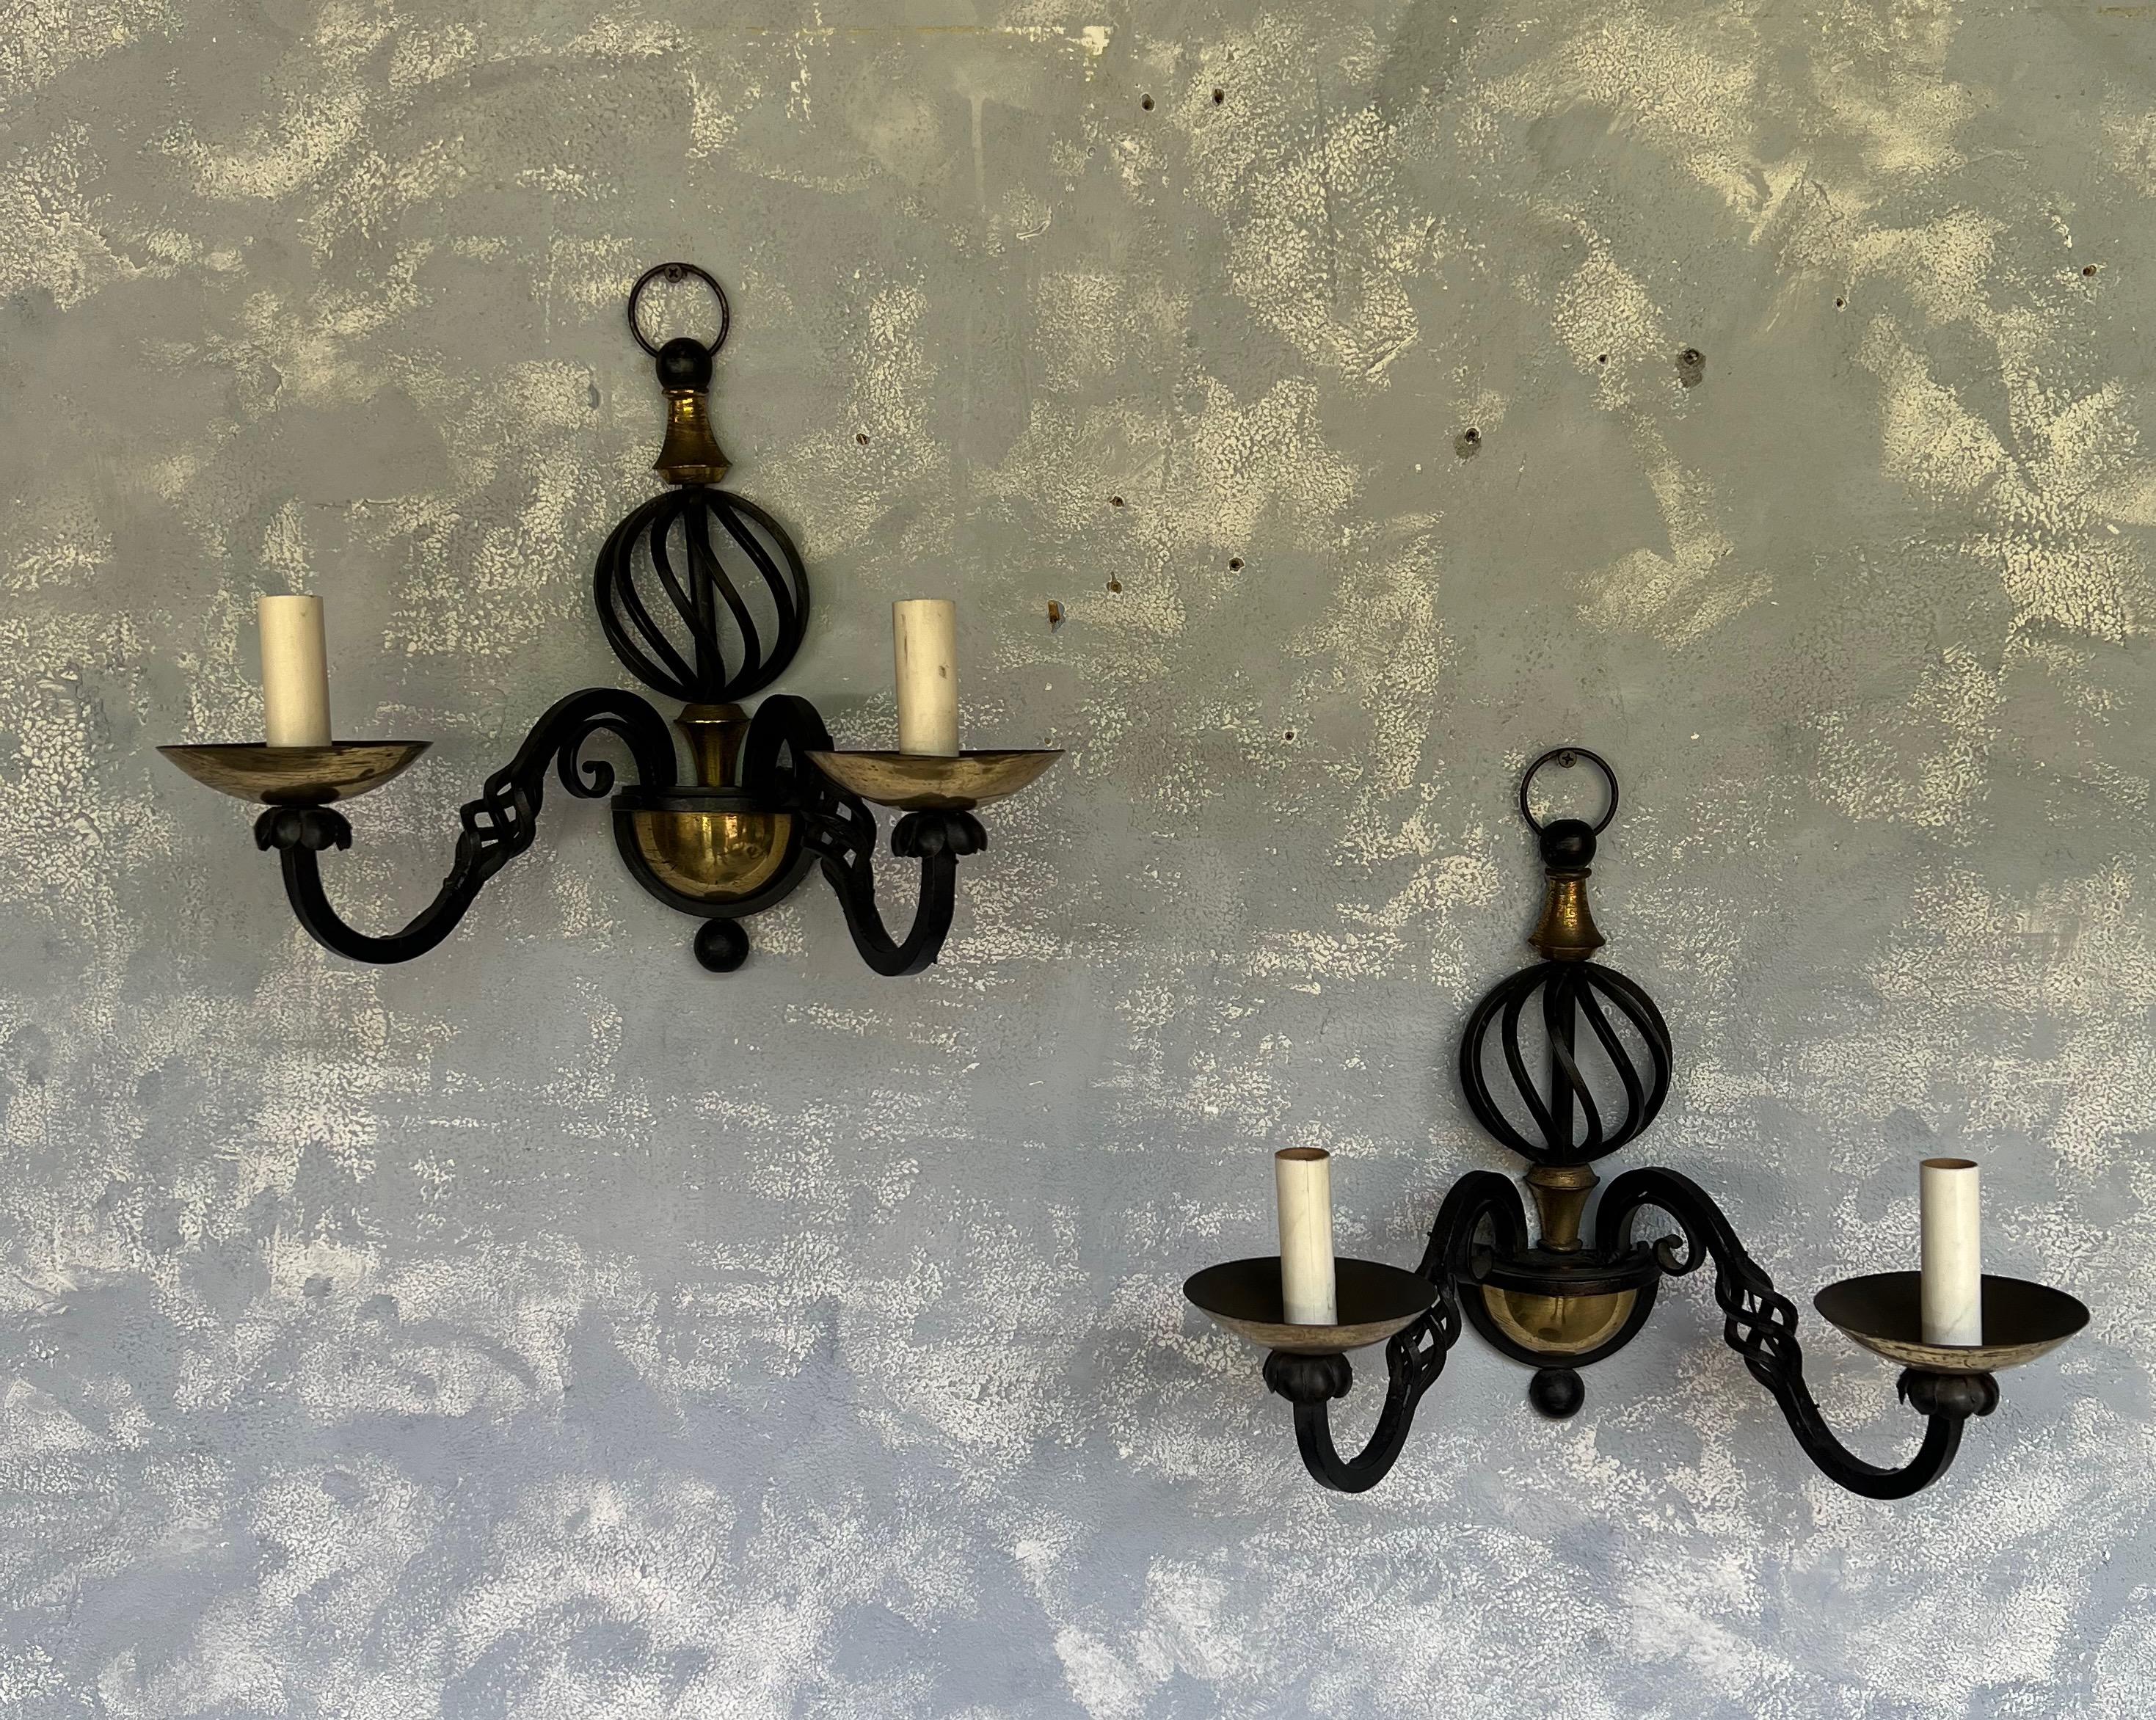 This pair of French 1940s wrought iron and brass double armed sconces adds a touch of vintage sophistication to any space they occupy. The combination of wrought iron and brass offers a striking contrast that catches the eye. These sconces are not